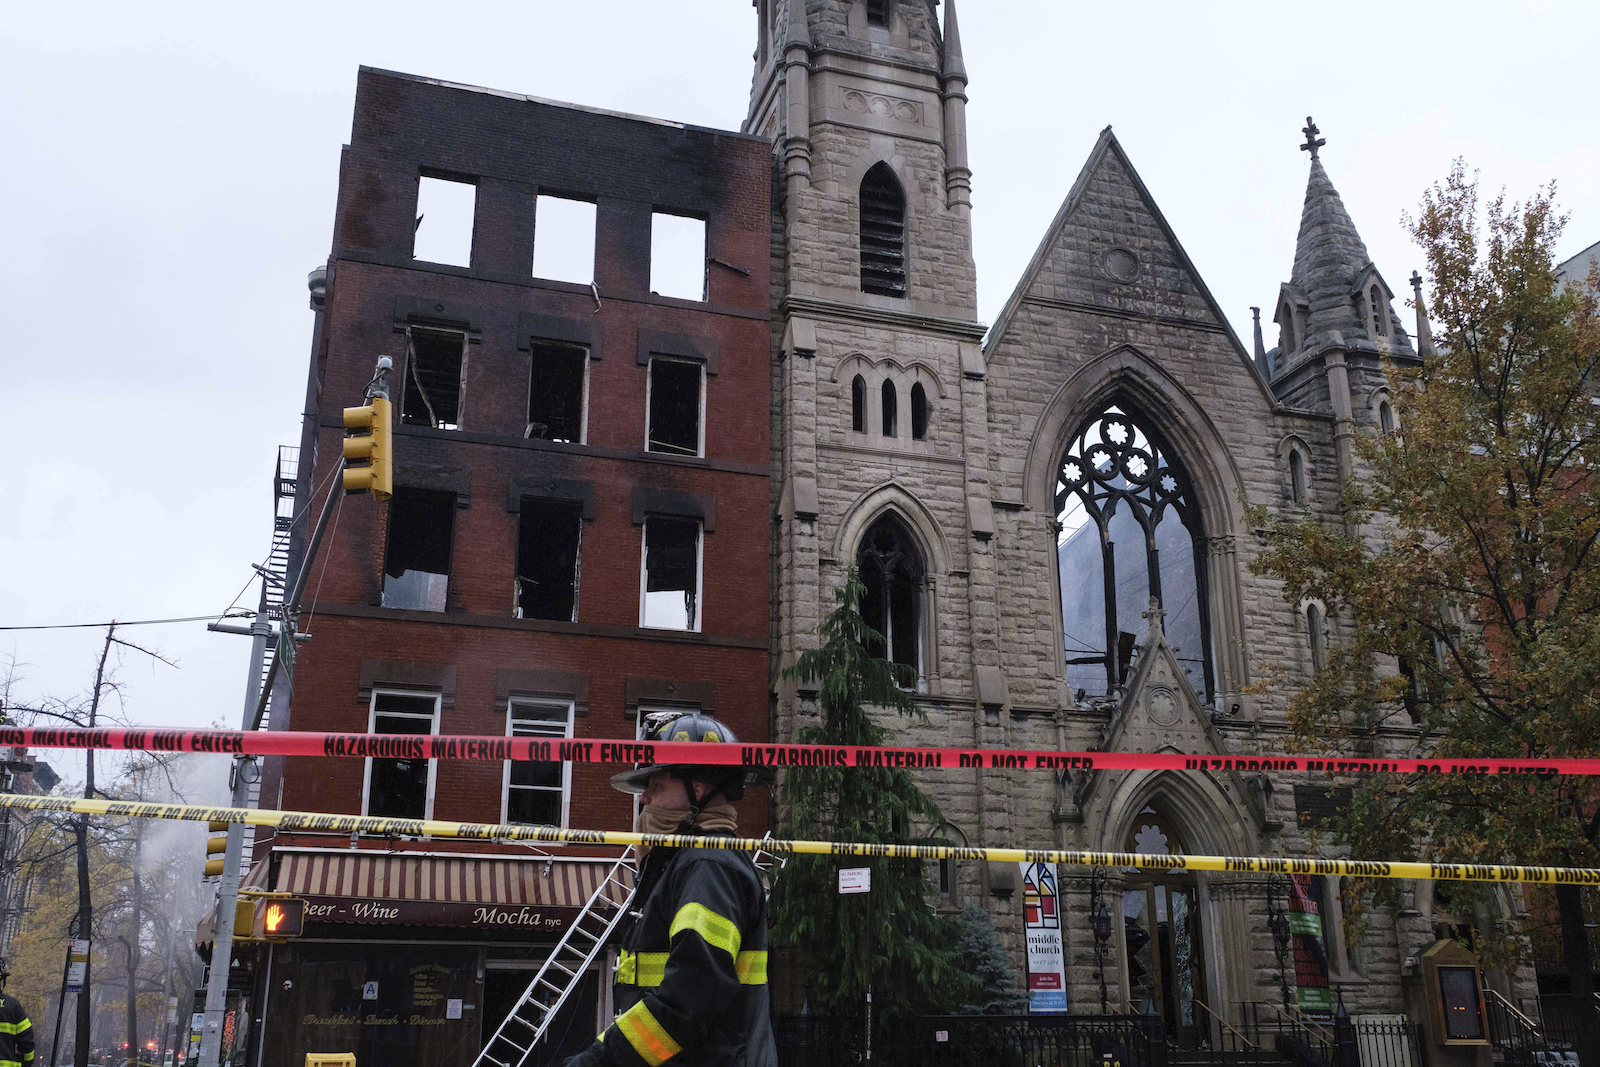 Firefighters work to extinguish a fire that erupted from the building next to Middle Collegiate Church on Dec. 5, 2020, in New York. The historic 19th-century church in lower Manhattan was gutted by a massive fire that sent flames shooting through the roof. The remaining facade will be demolished in 2023. (AP Photo/Yuki Iwamura)